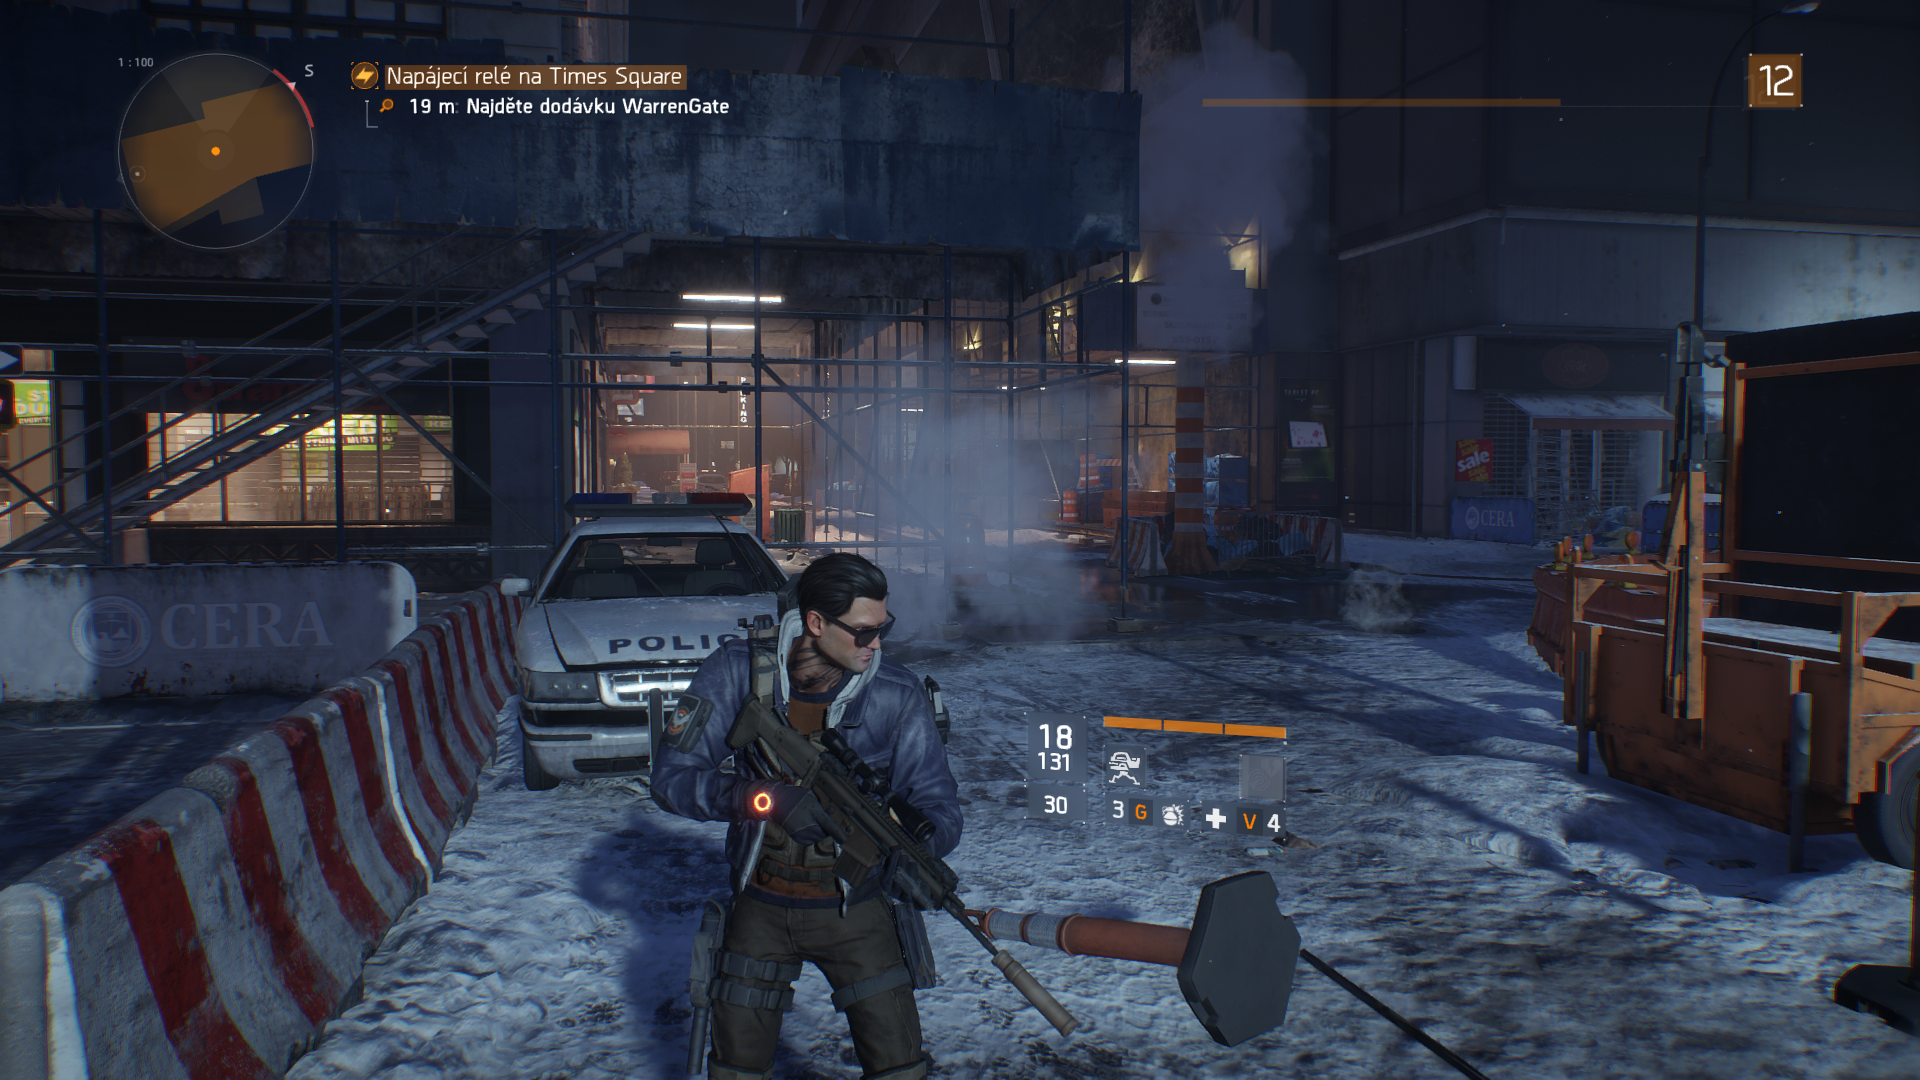 Tom Clancy’s The Division™